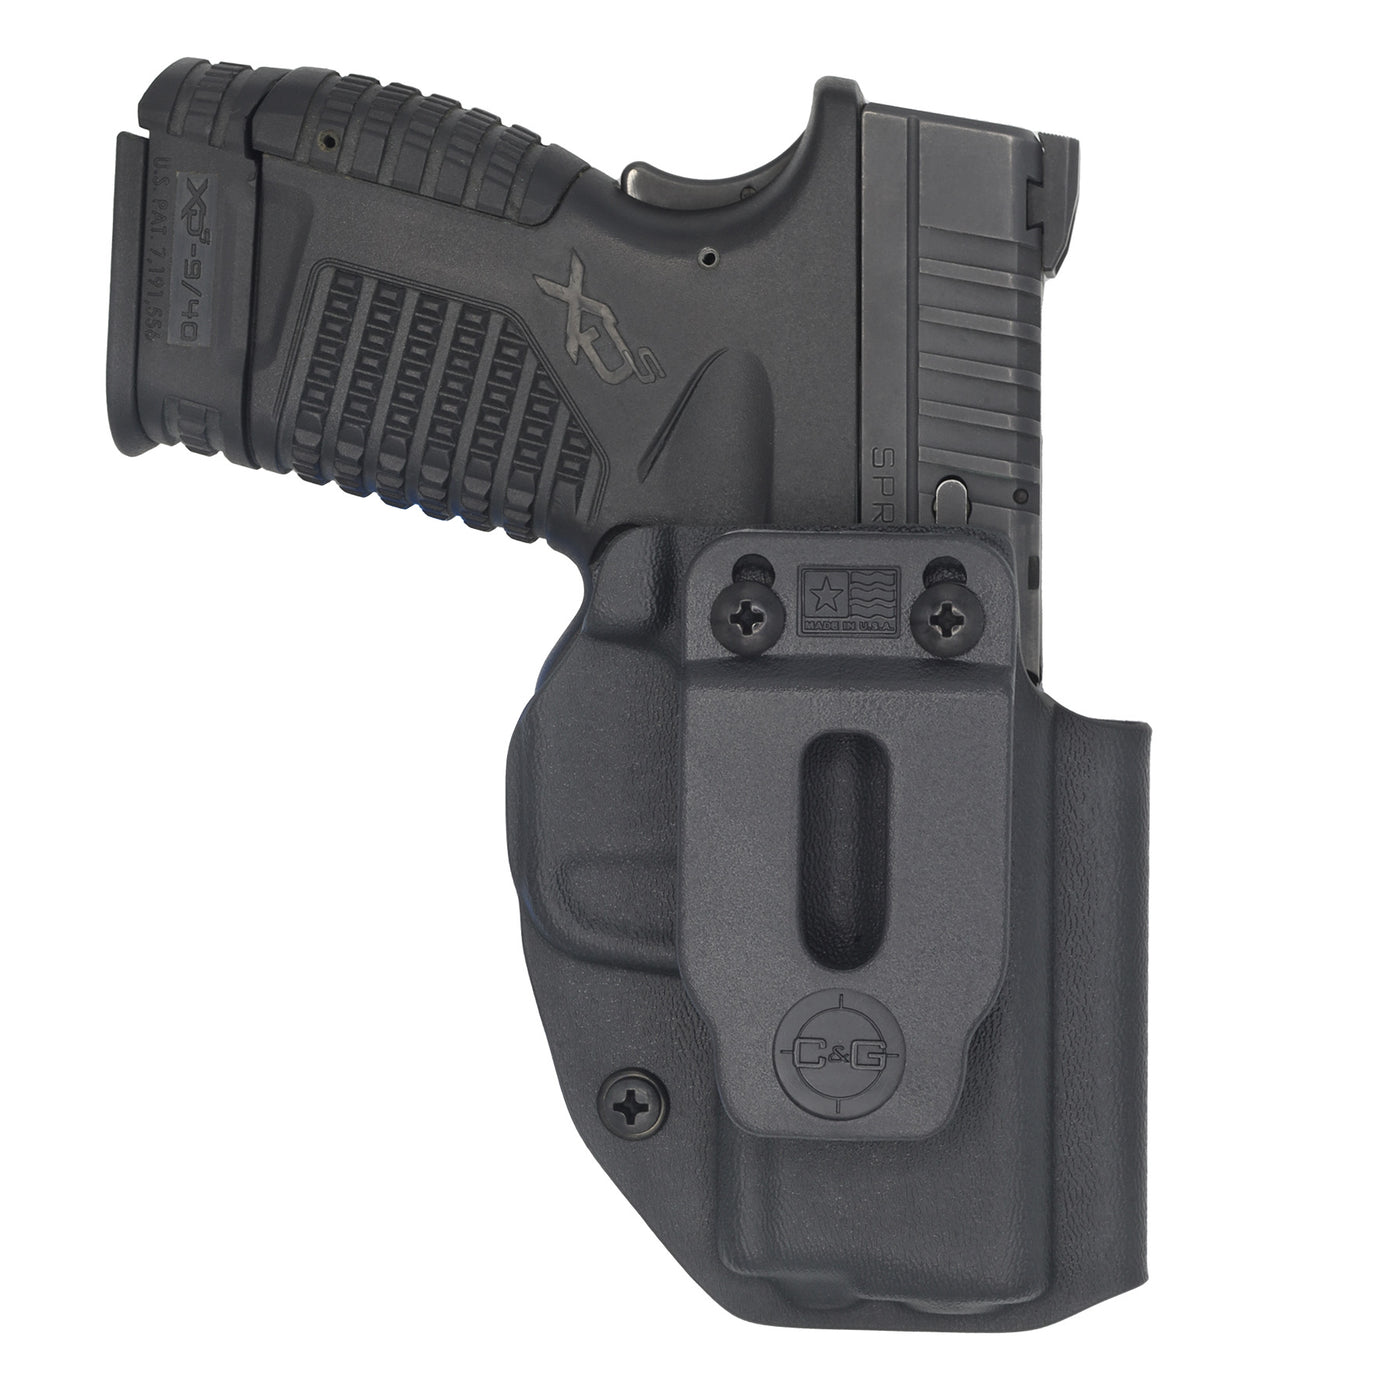 C&G Holsters customCovert IWB kydex holster for Springfield Xds 3.3 in black